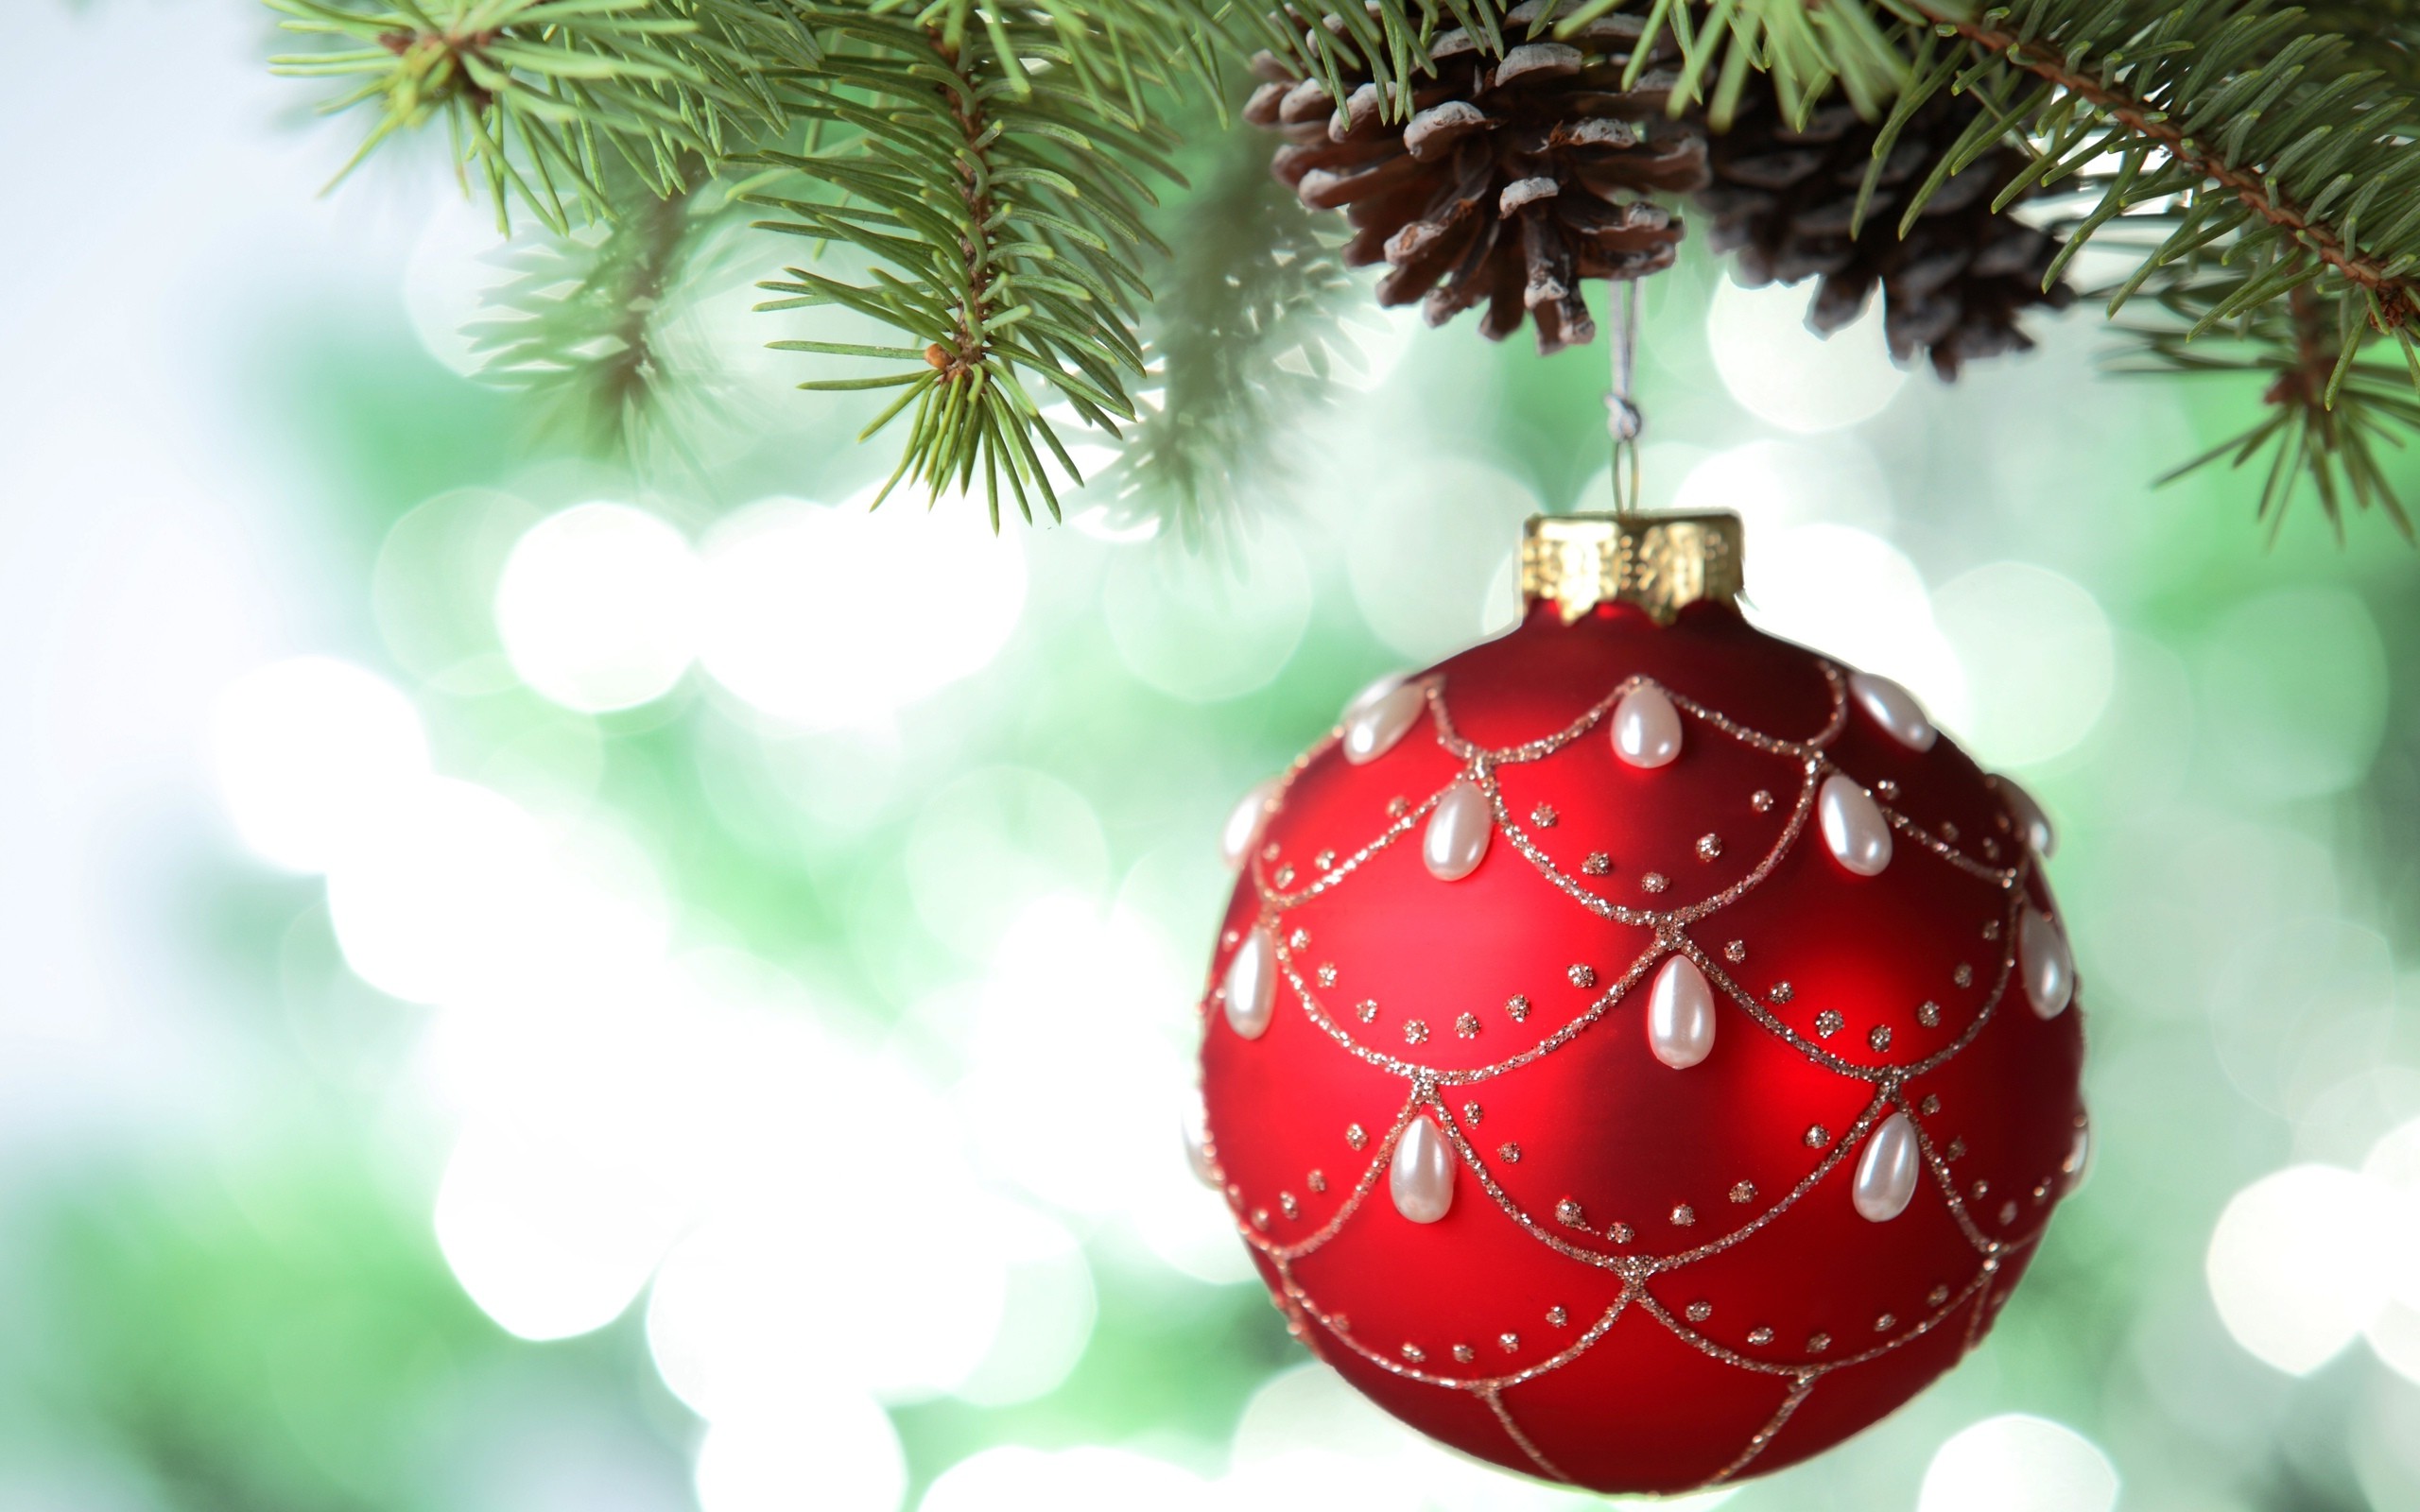 New Year, Snow, Christmas Ornaments, Cones, Bokeh, Leaves Wallpaper